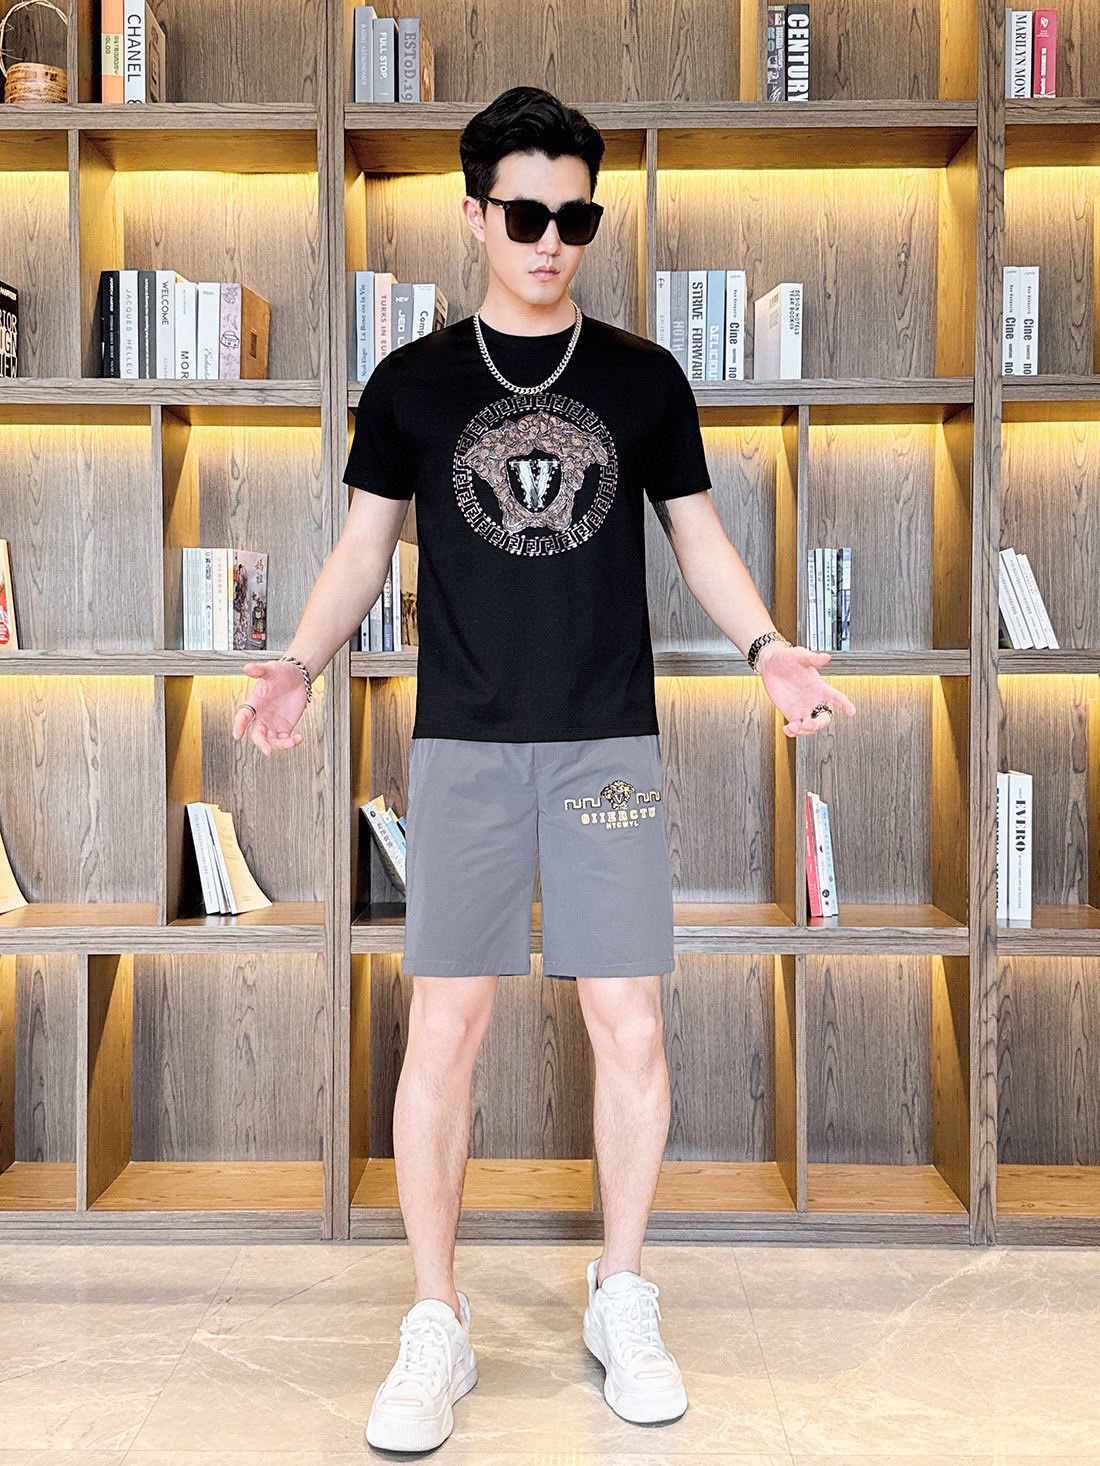 Versace Clothing Shorts T-Shirt Two Piece Outfits & Matching Sets Men Summer Collection Fashion Short Sleeve